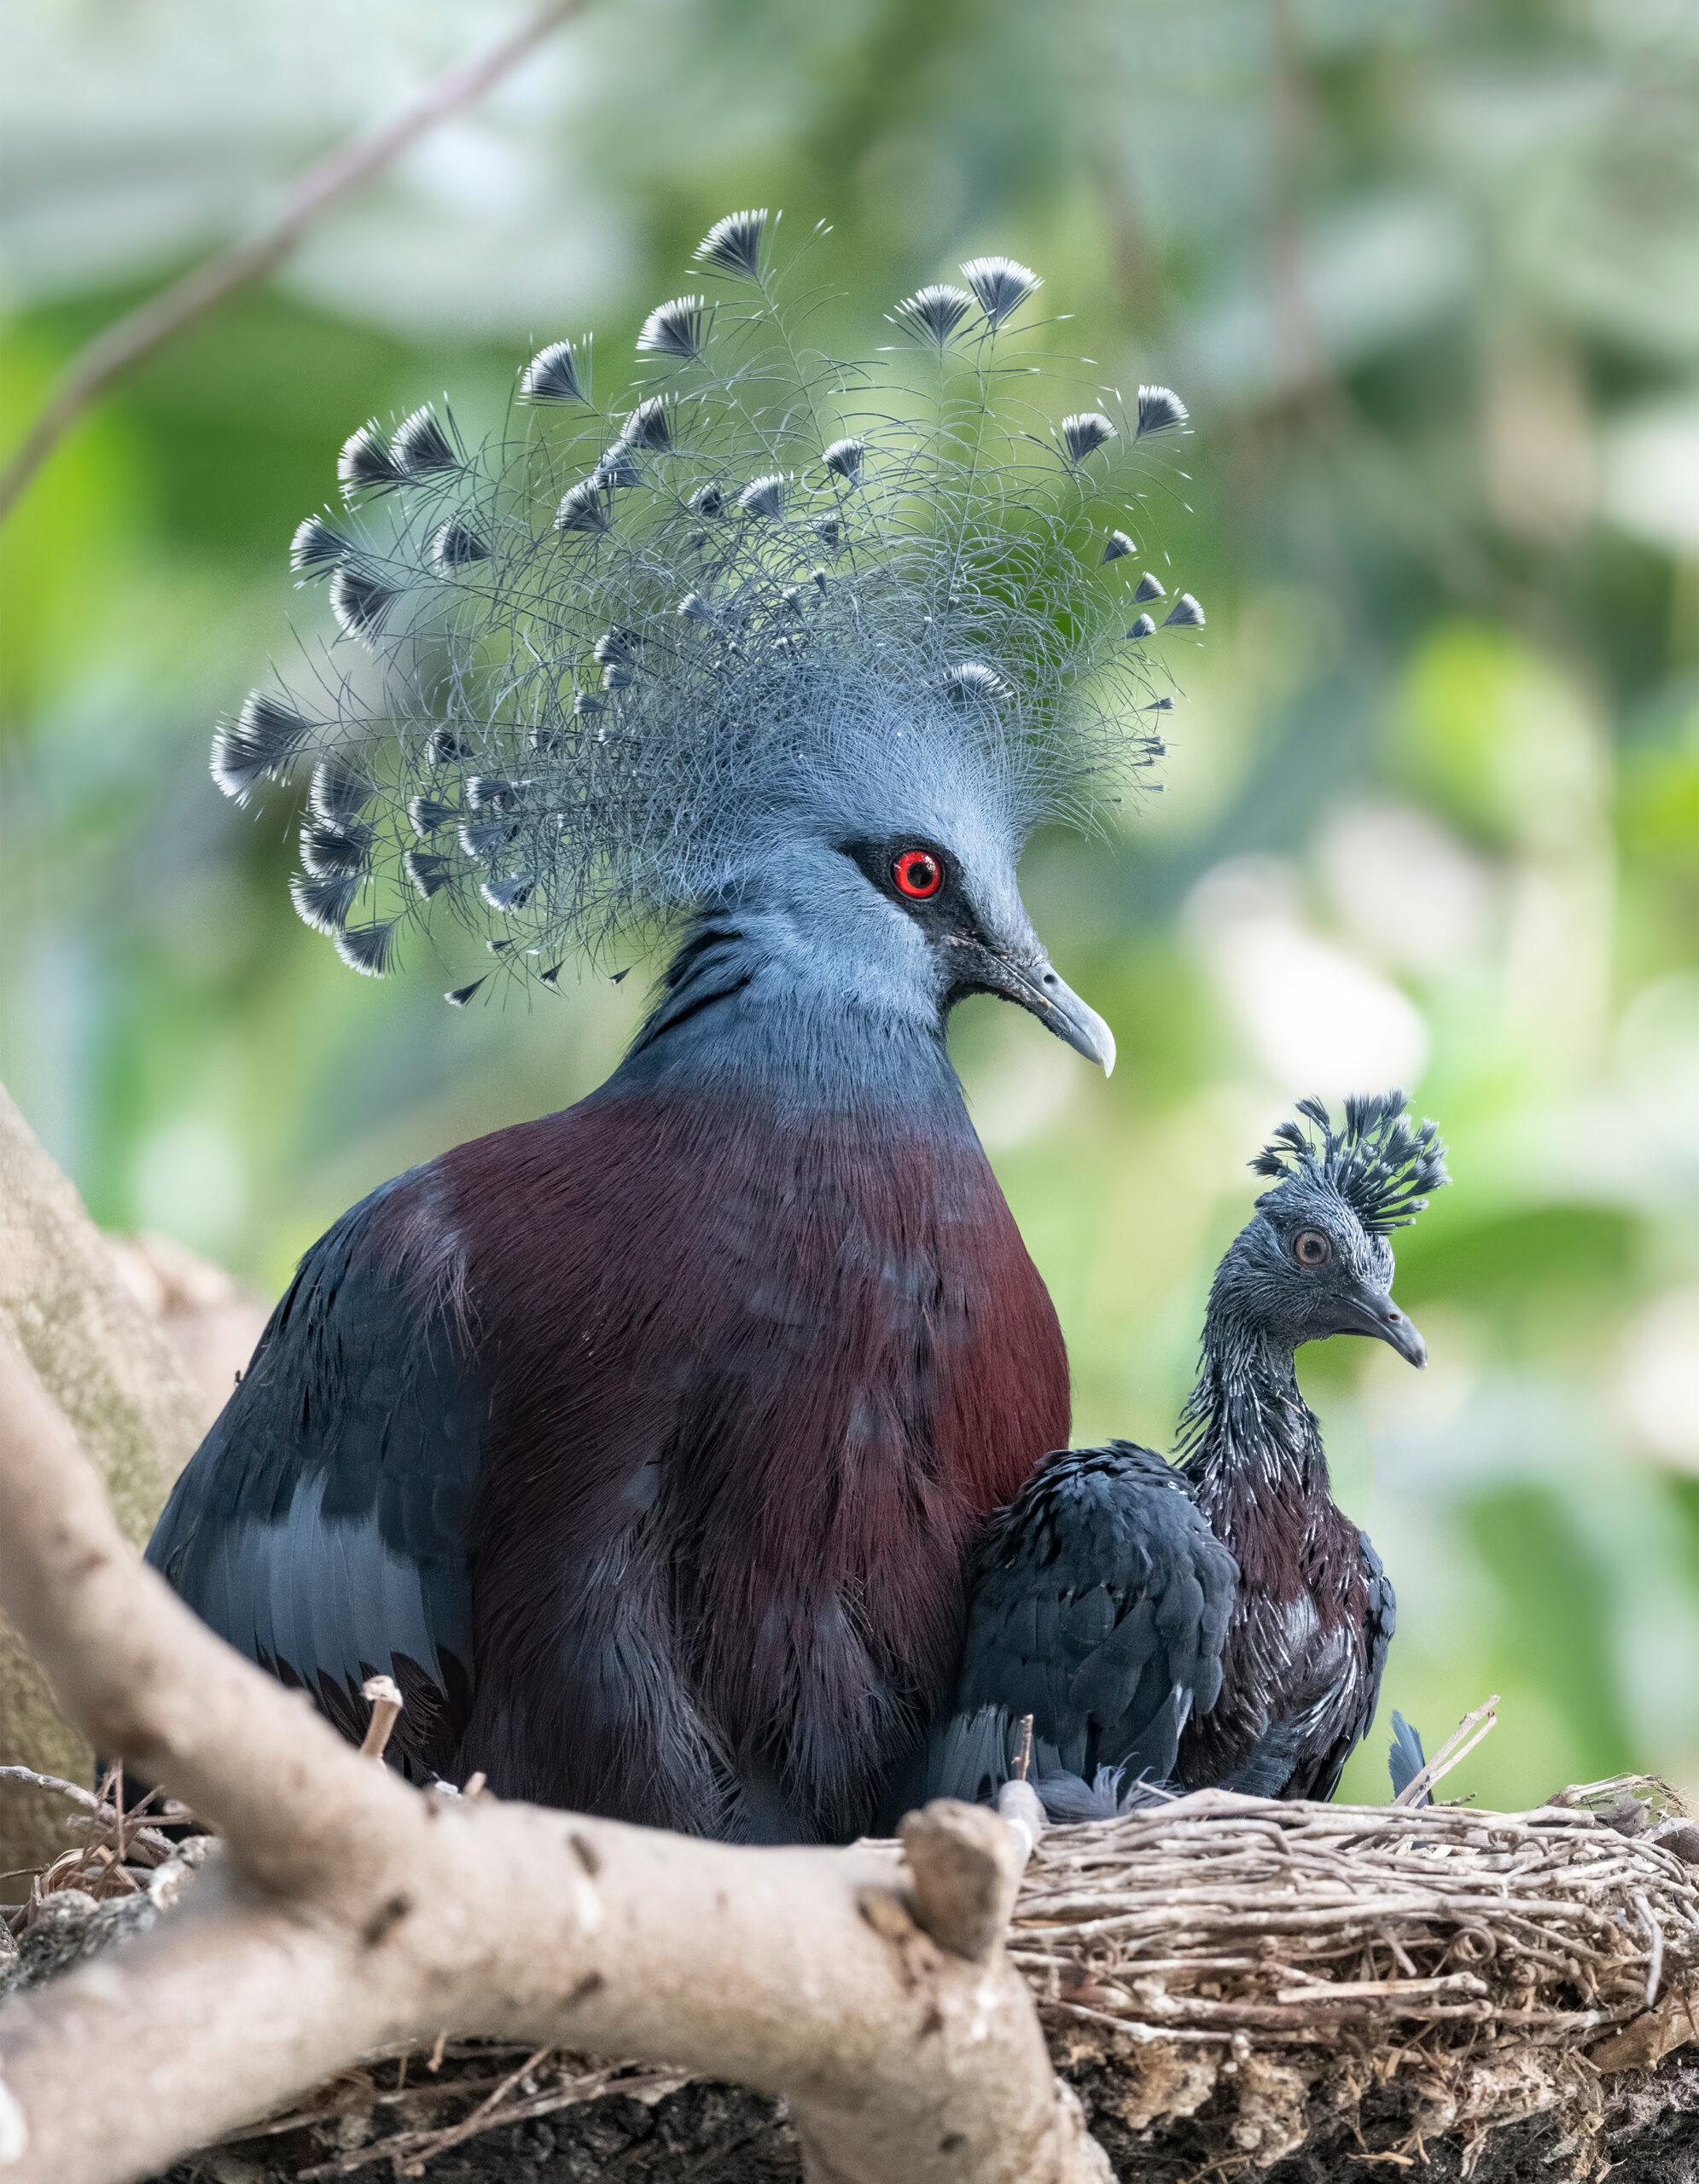 Victoria Crowned Pigeon in the nest with a chick